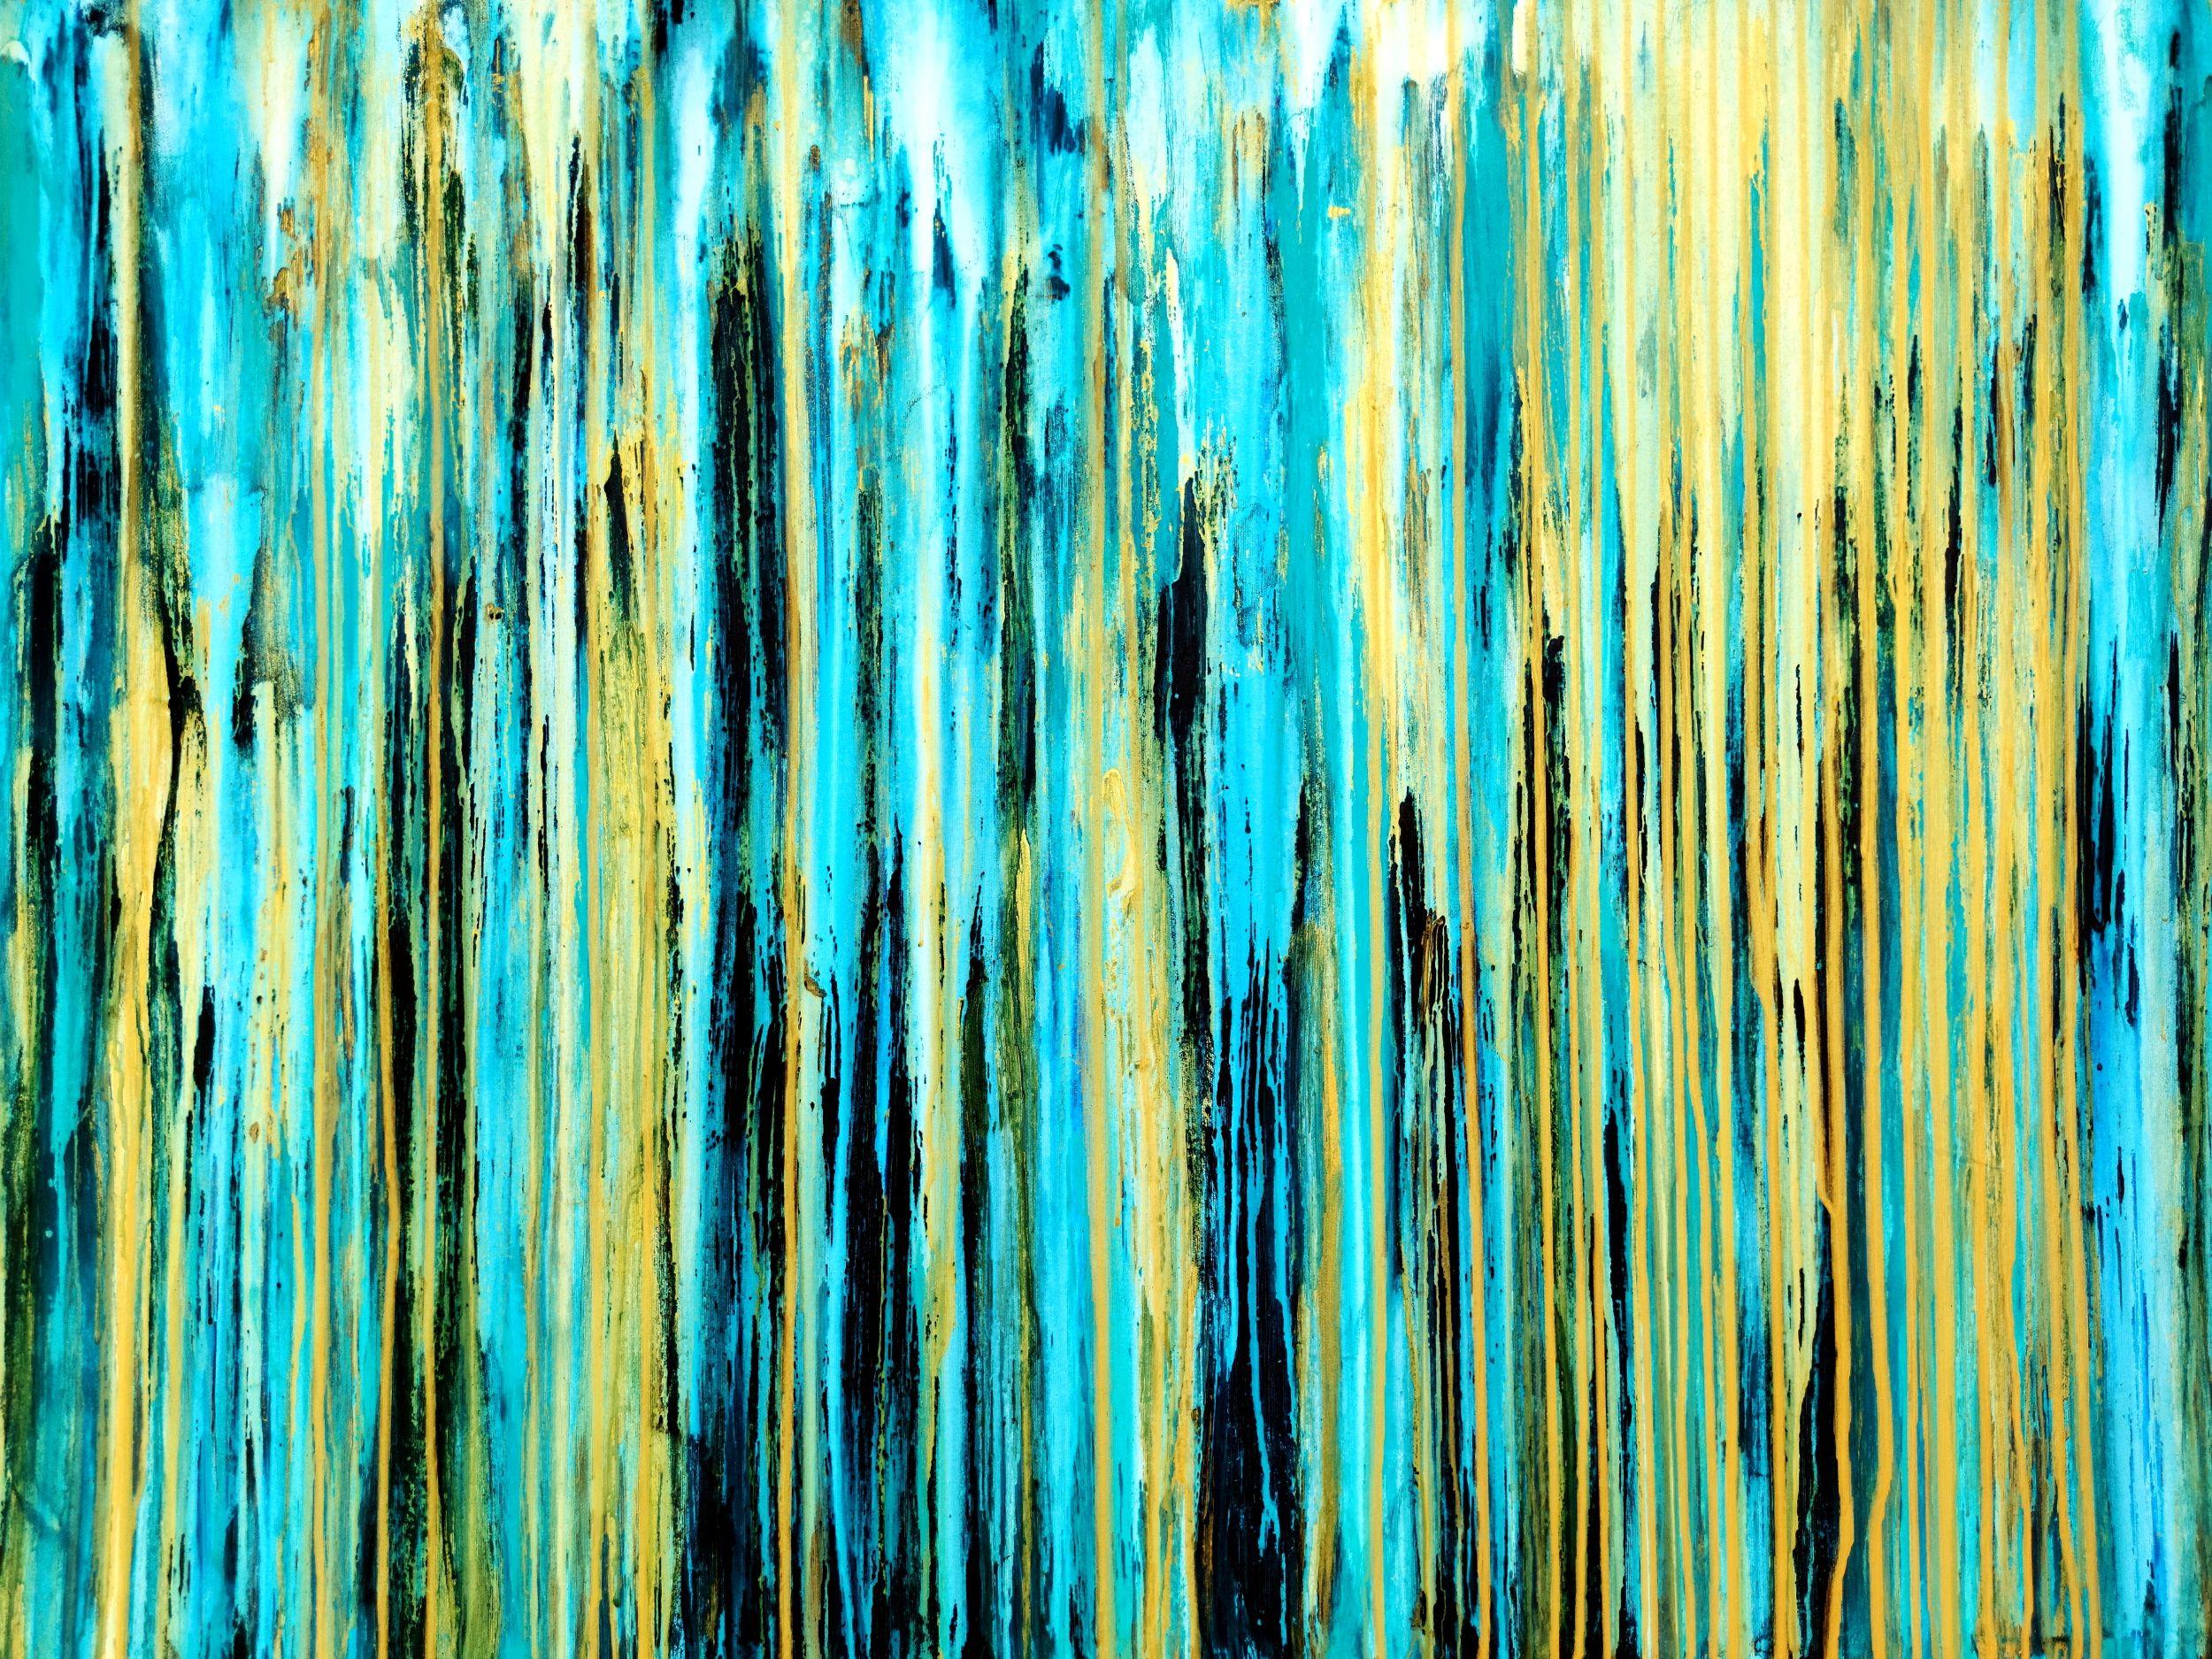 Carla Sá Fernandes Abstract Painting - The Emotional Creation #305, Painting, Acrylic on Canvas